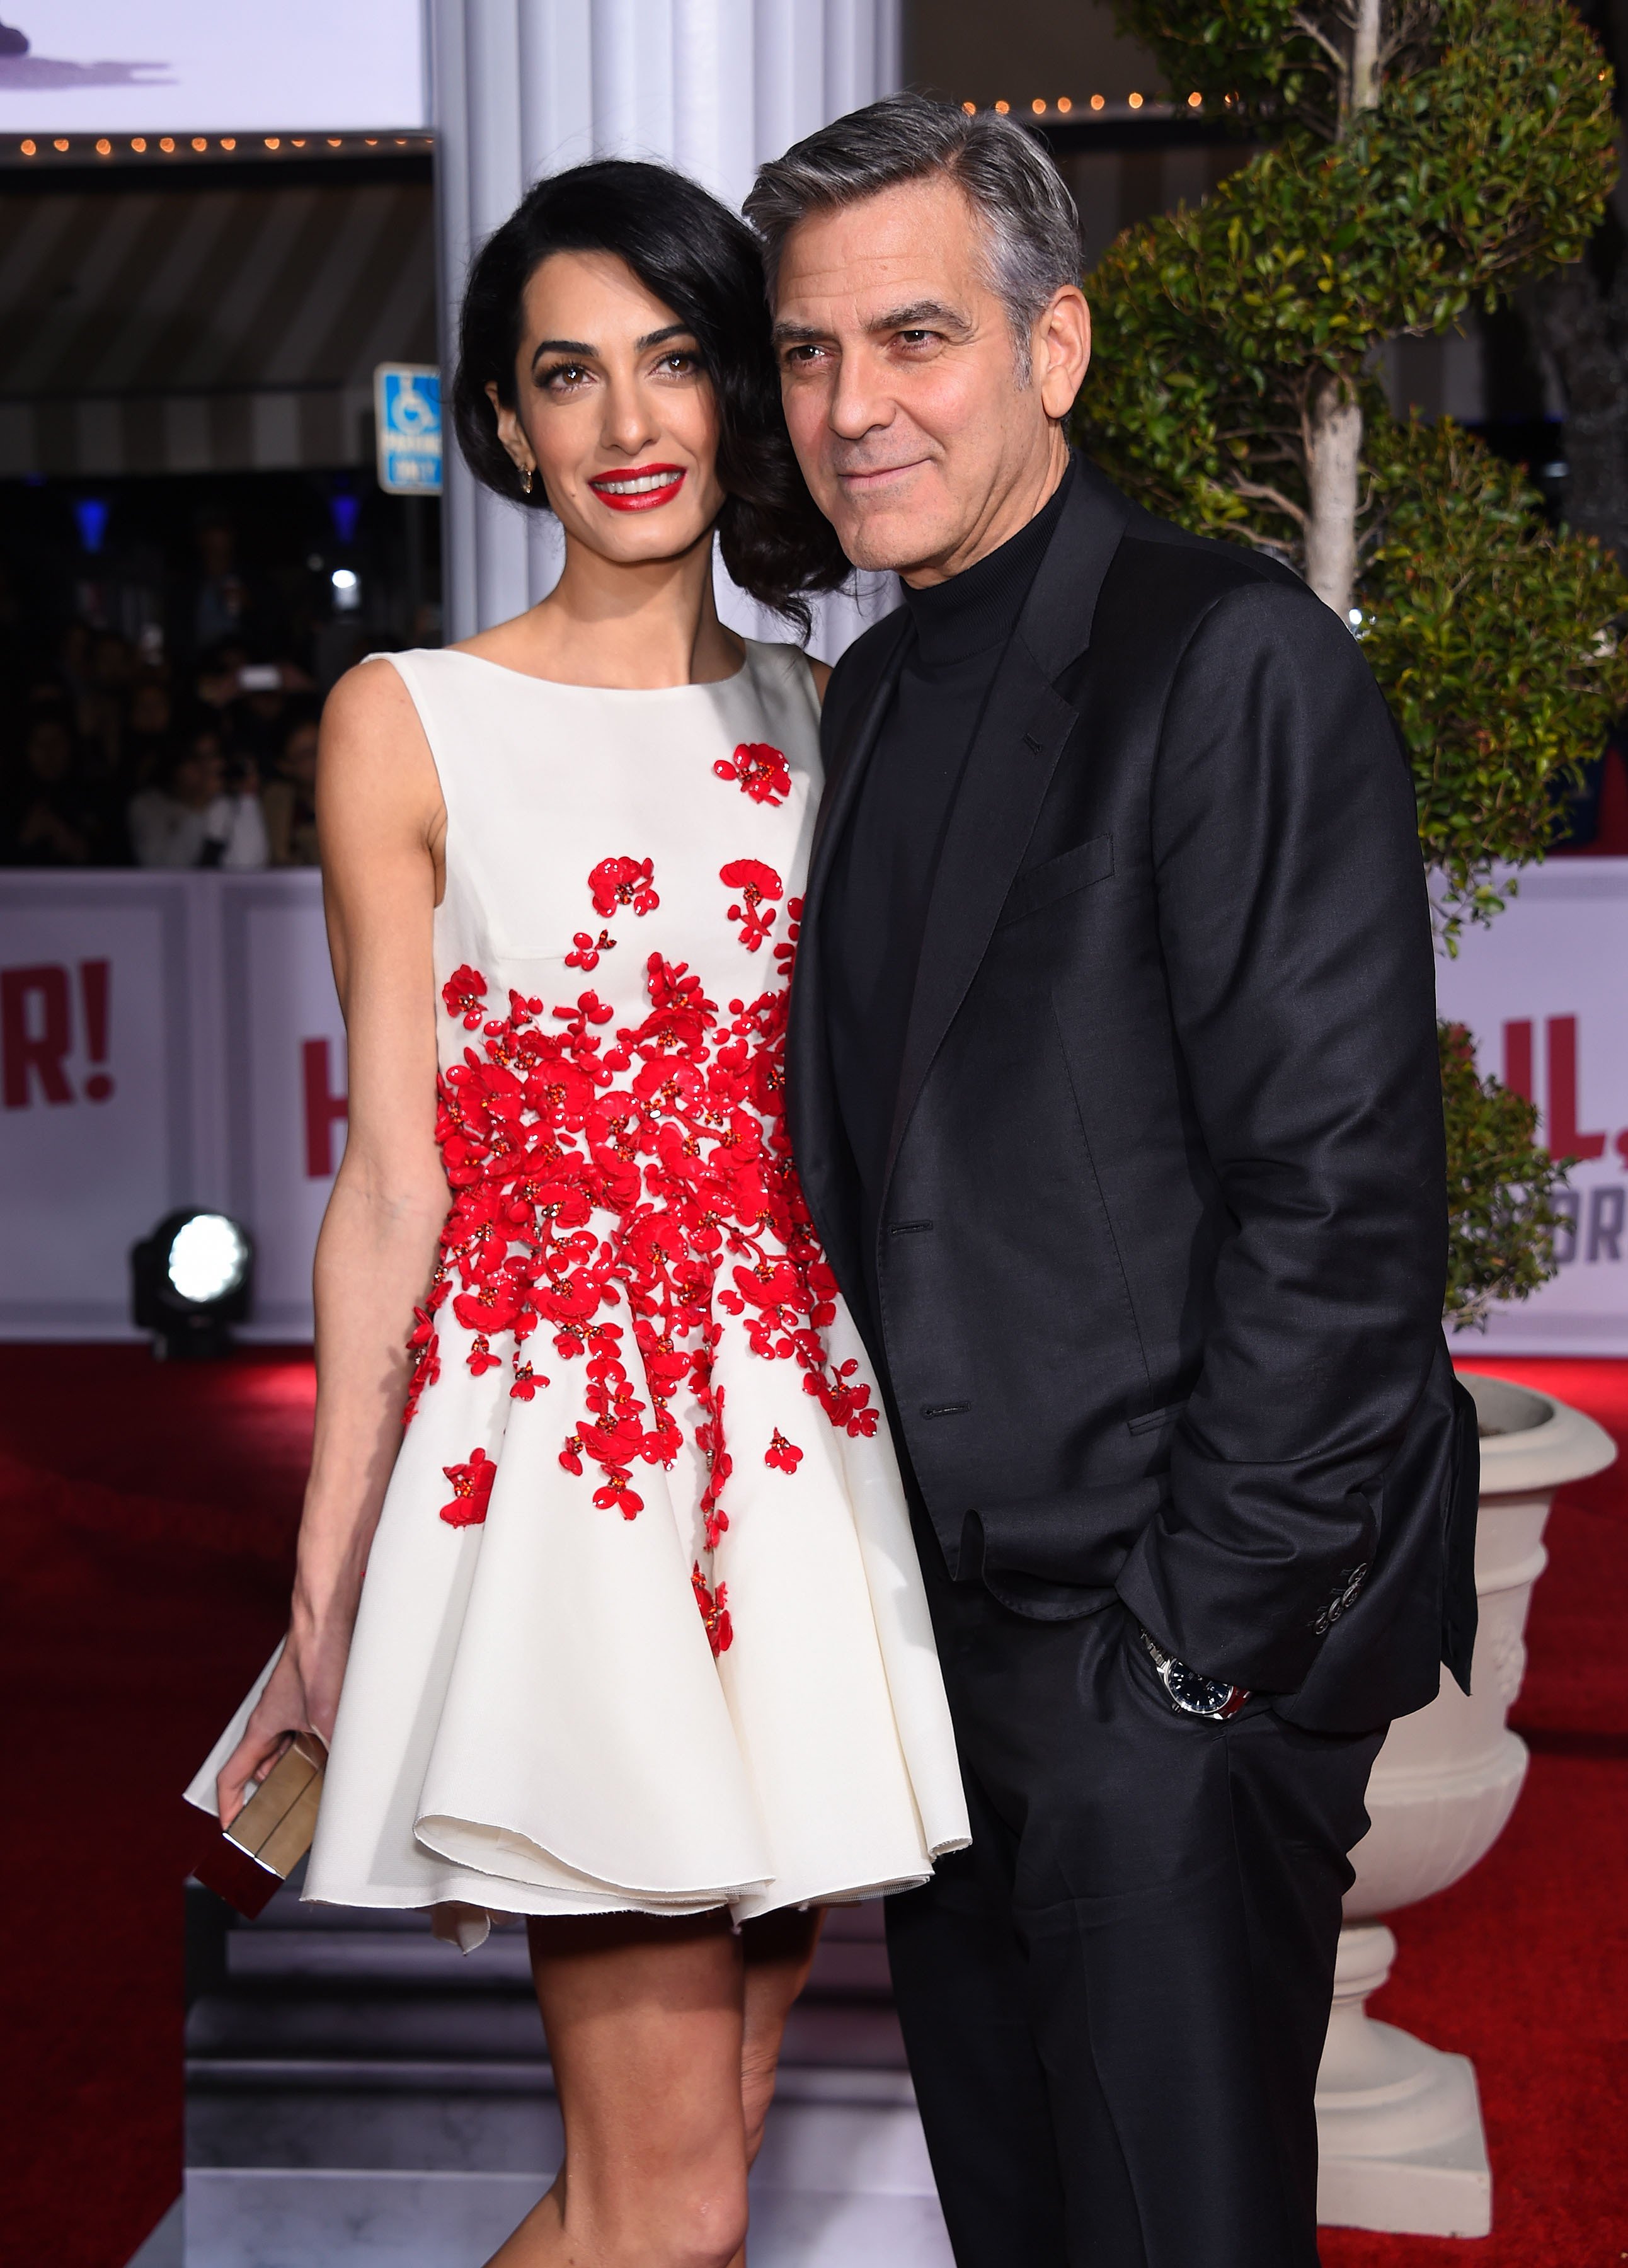 George Clooney & Amal Alamuddin arrives to the "Hail, Caesar" World Premiere on February 01, 2016. | Photo: Shutterstock